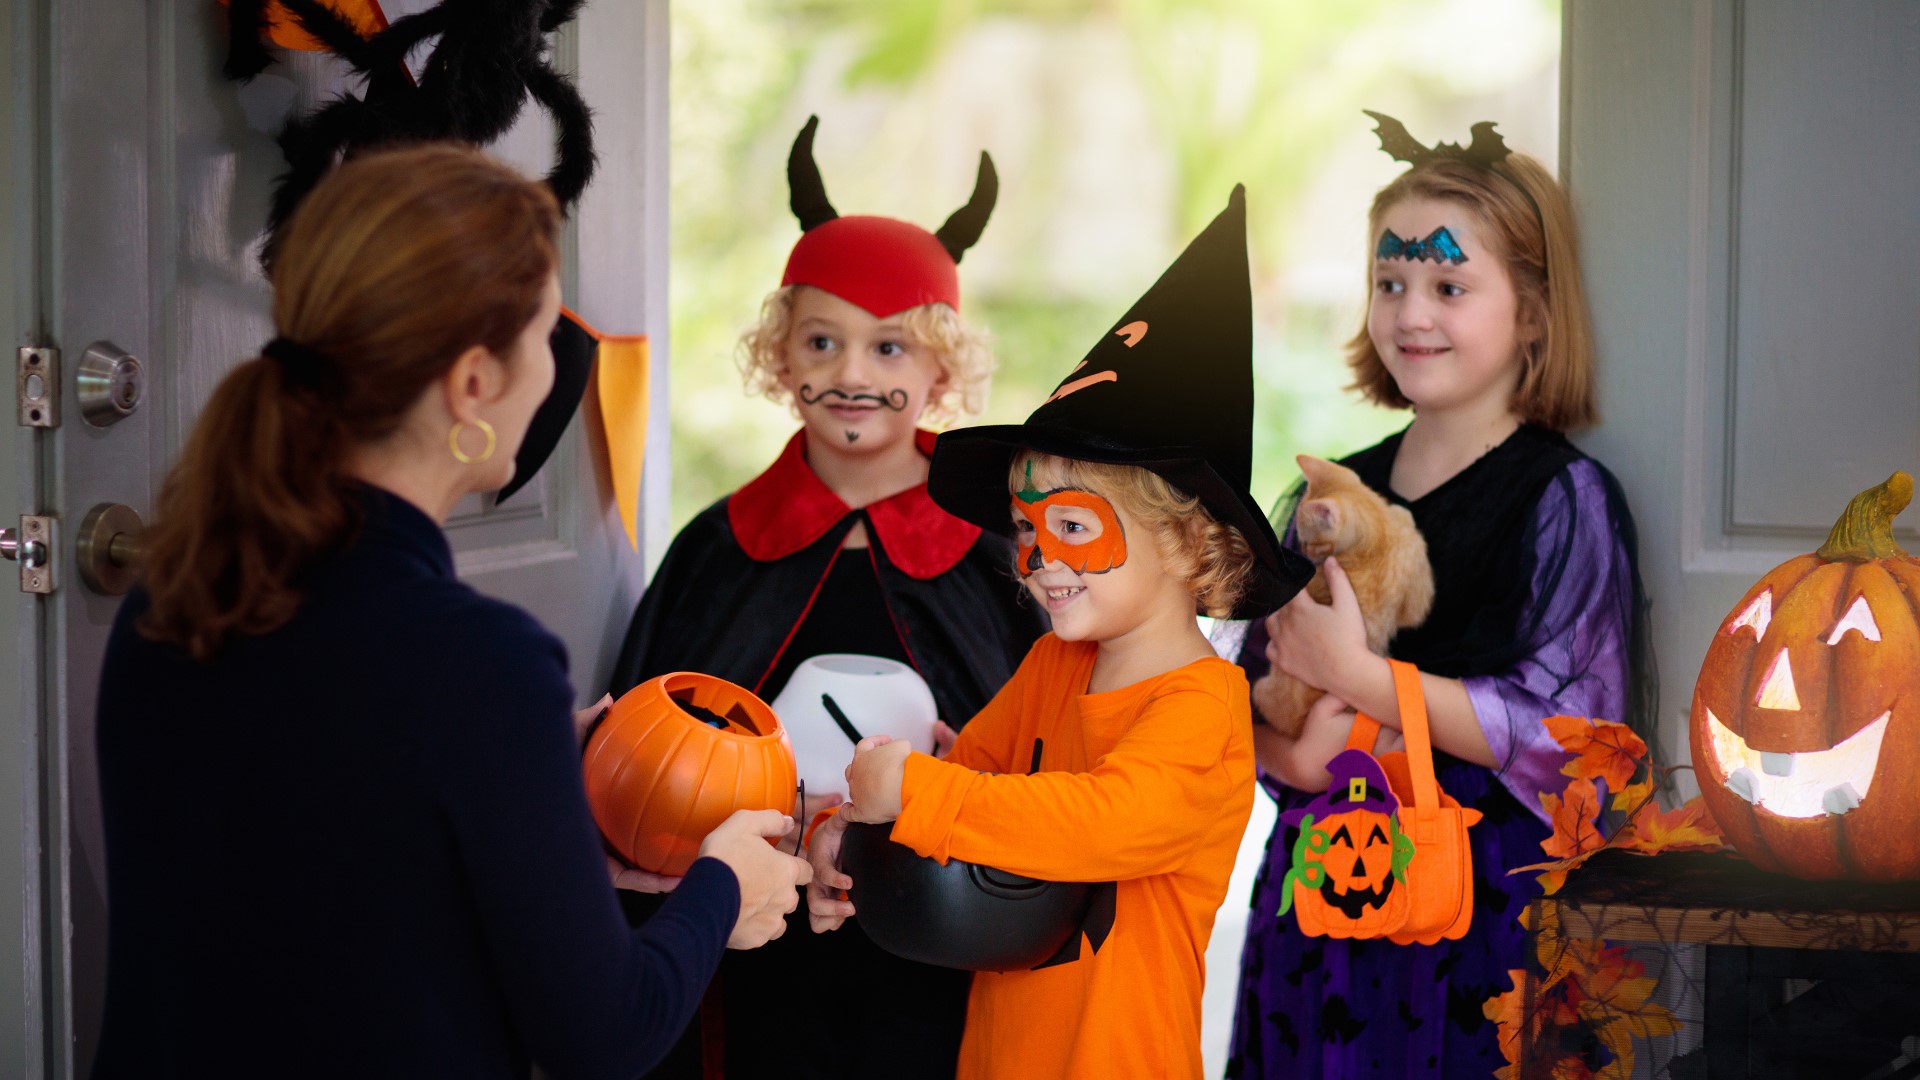 Citing the coronavirus, the LA County Department of Public Health initially banned door-to-door or car-to-car trick-or-treating for Halloween.